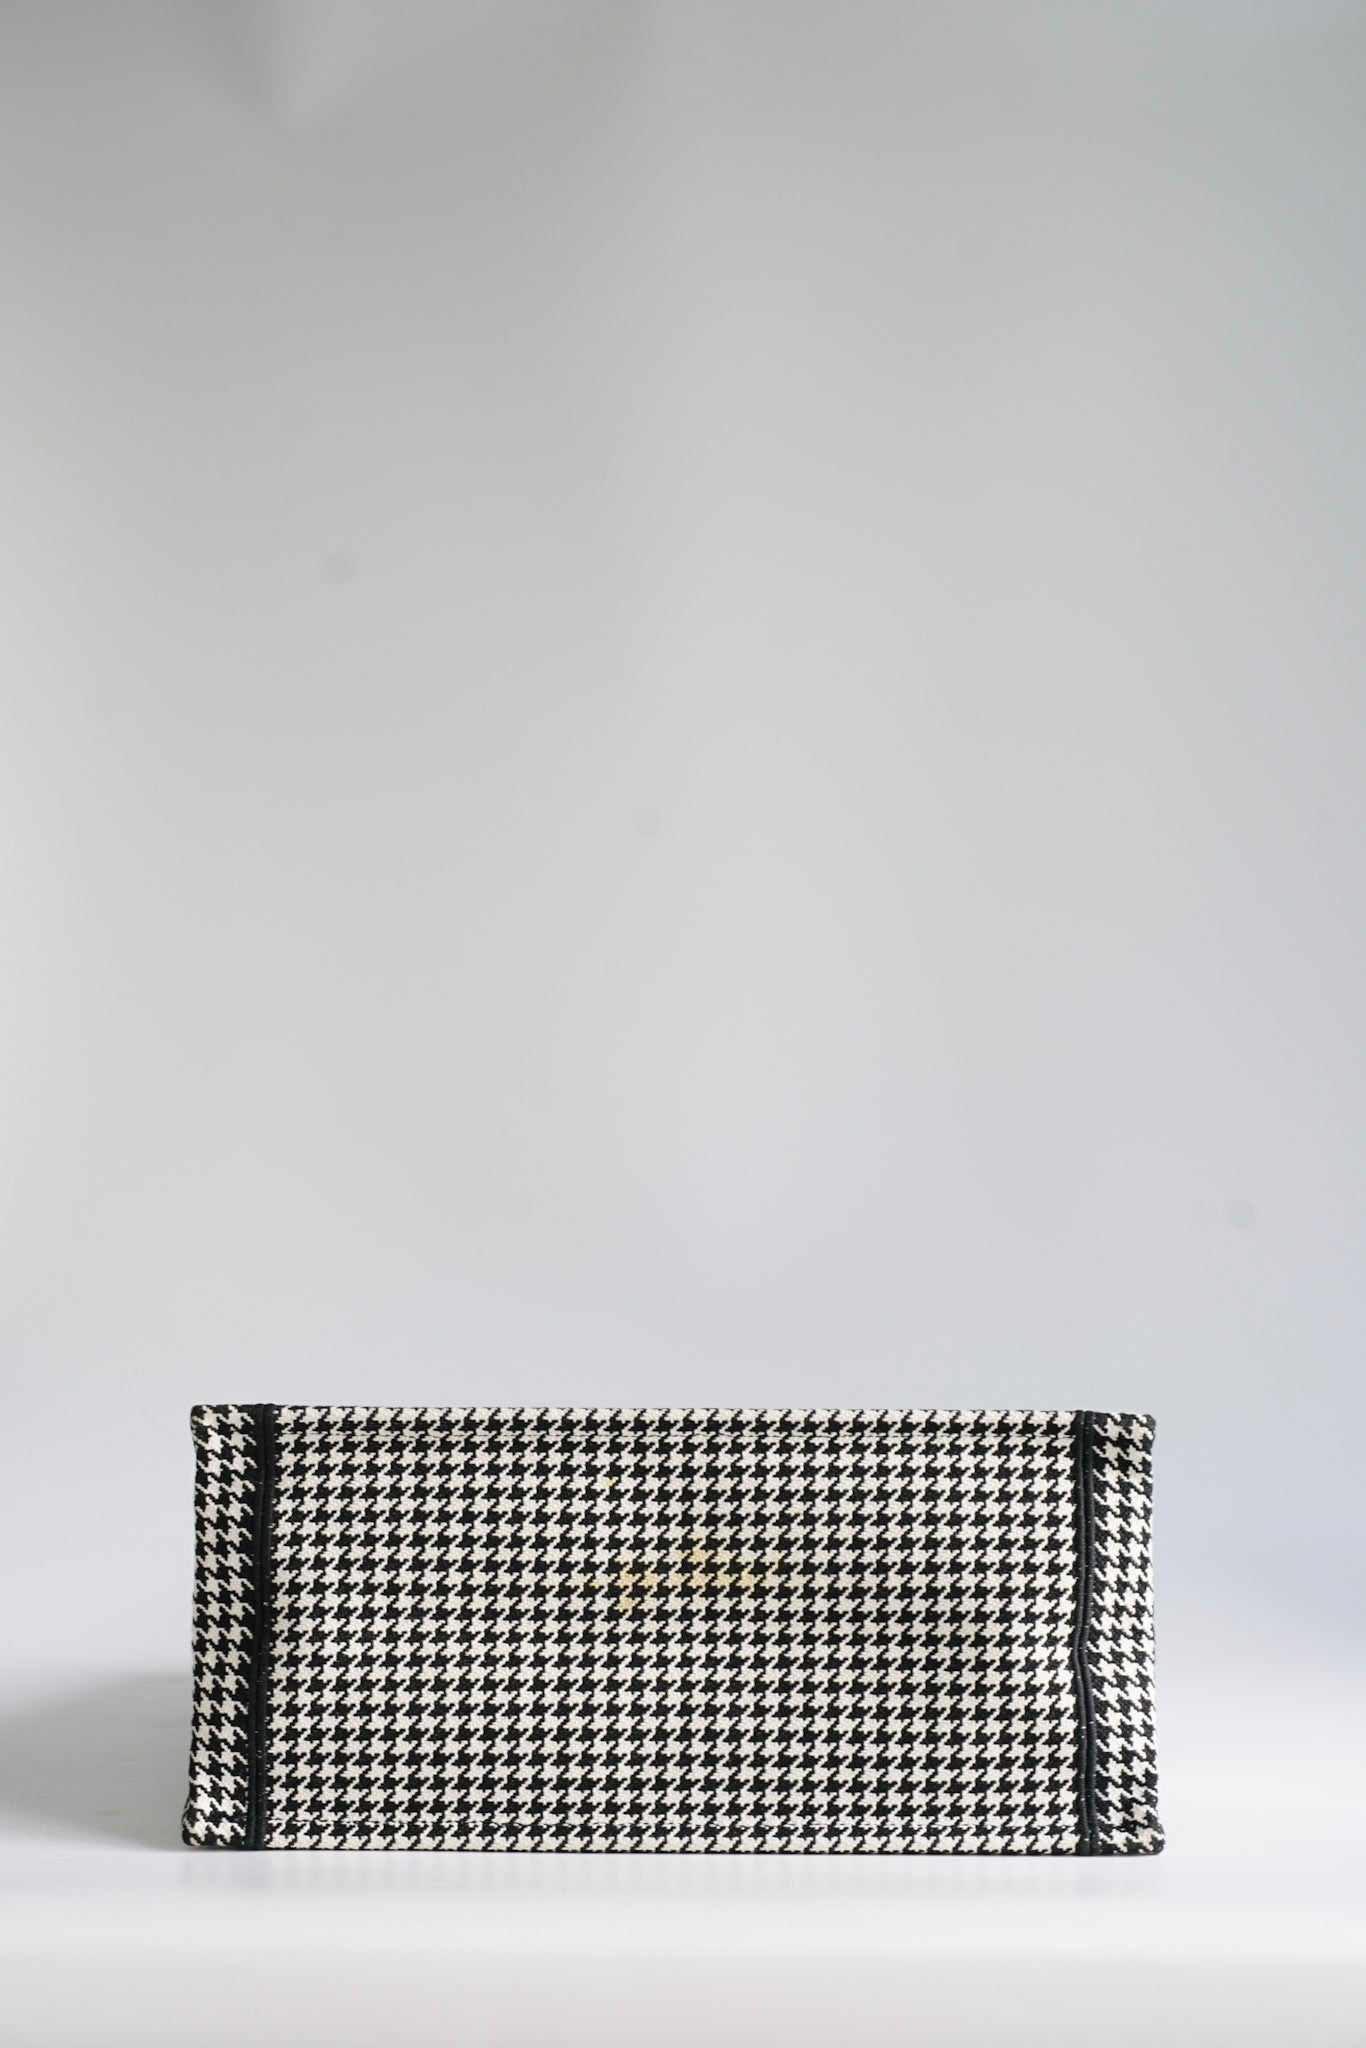 Christian Dior (Old Small) Houndstooth Black and White Book Tote